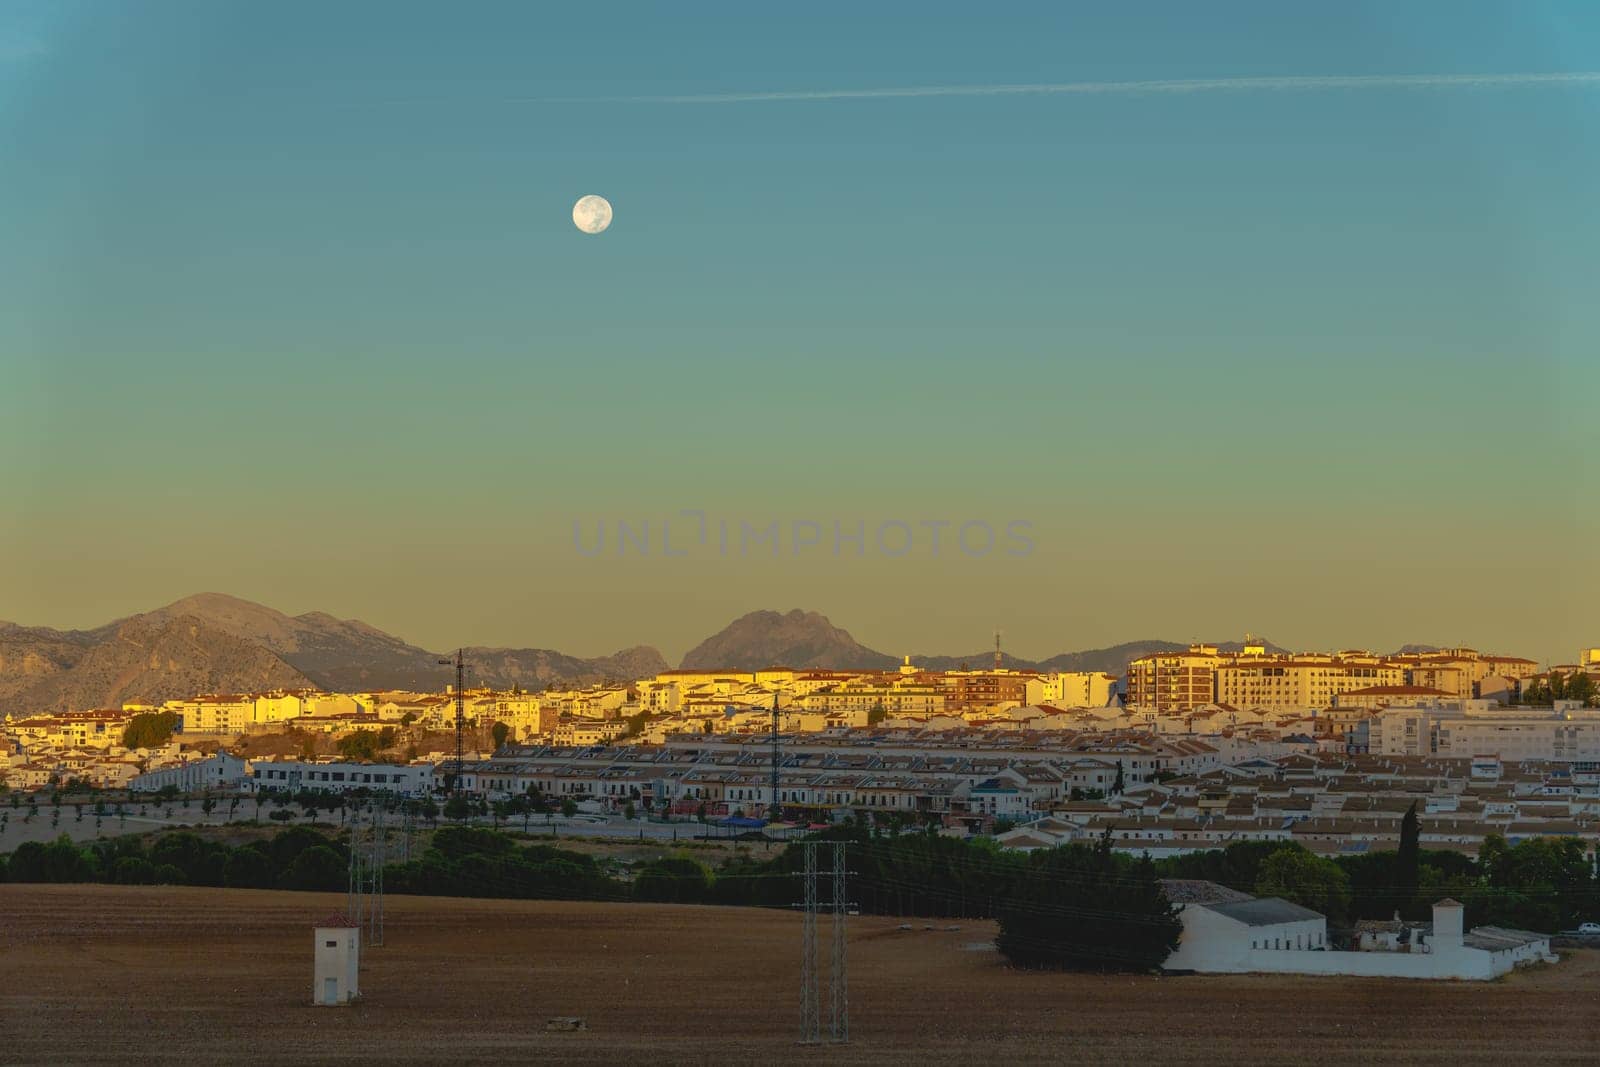 sunrise in the city with reddish and blue tones with the full moon in the sky. by joseantona